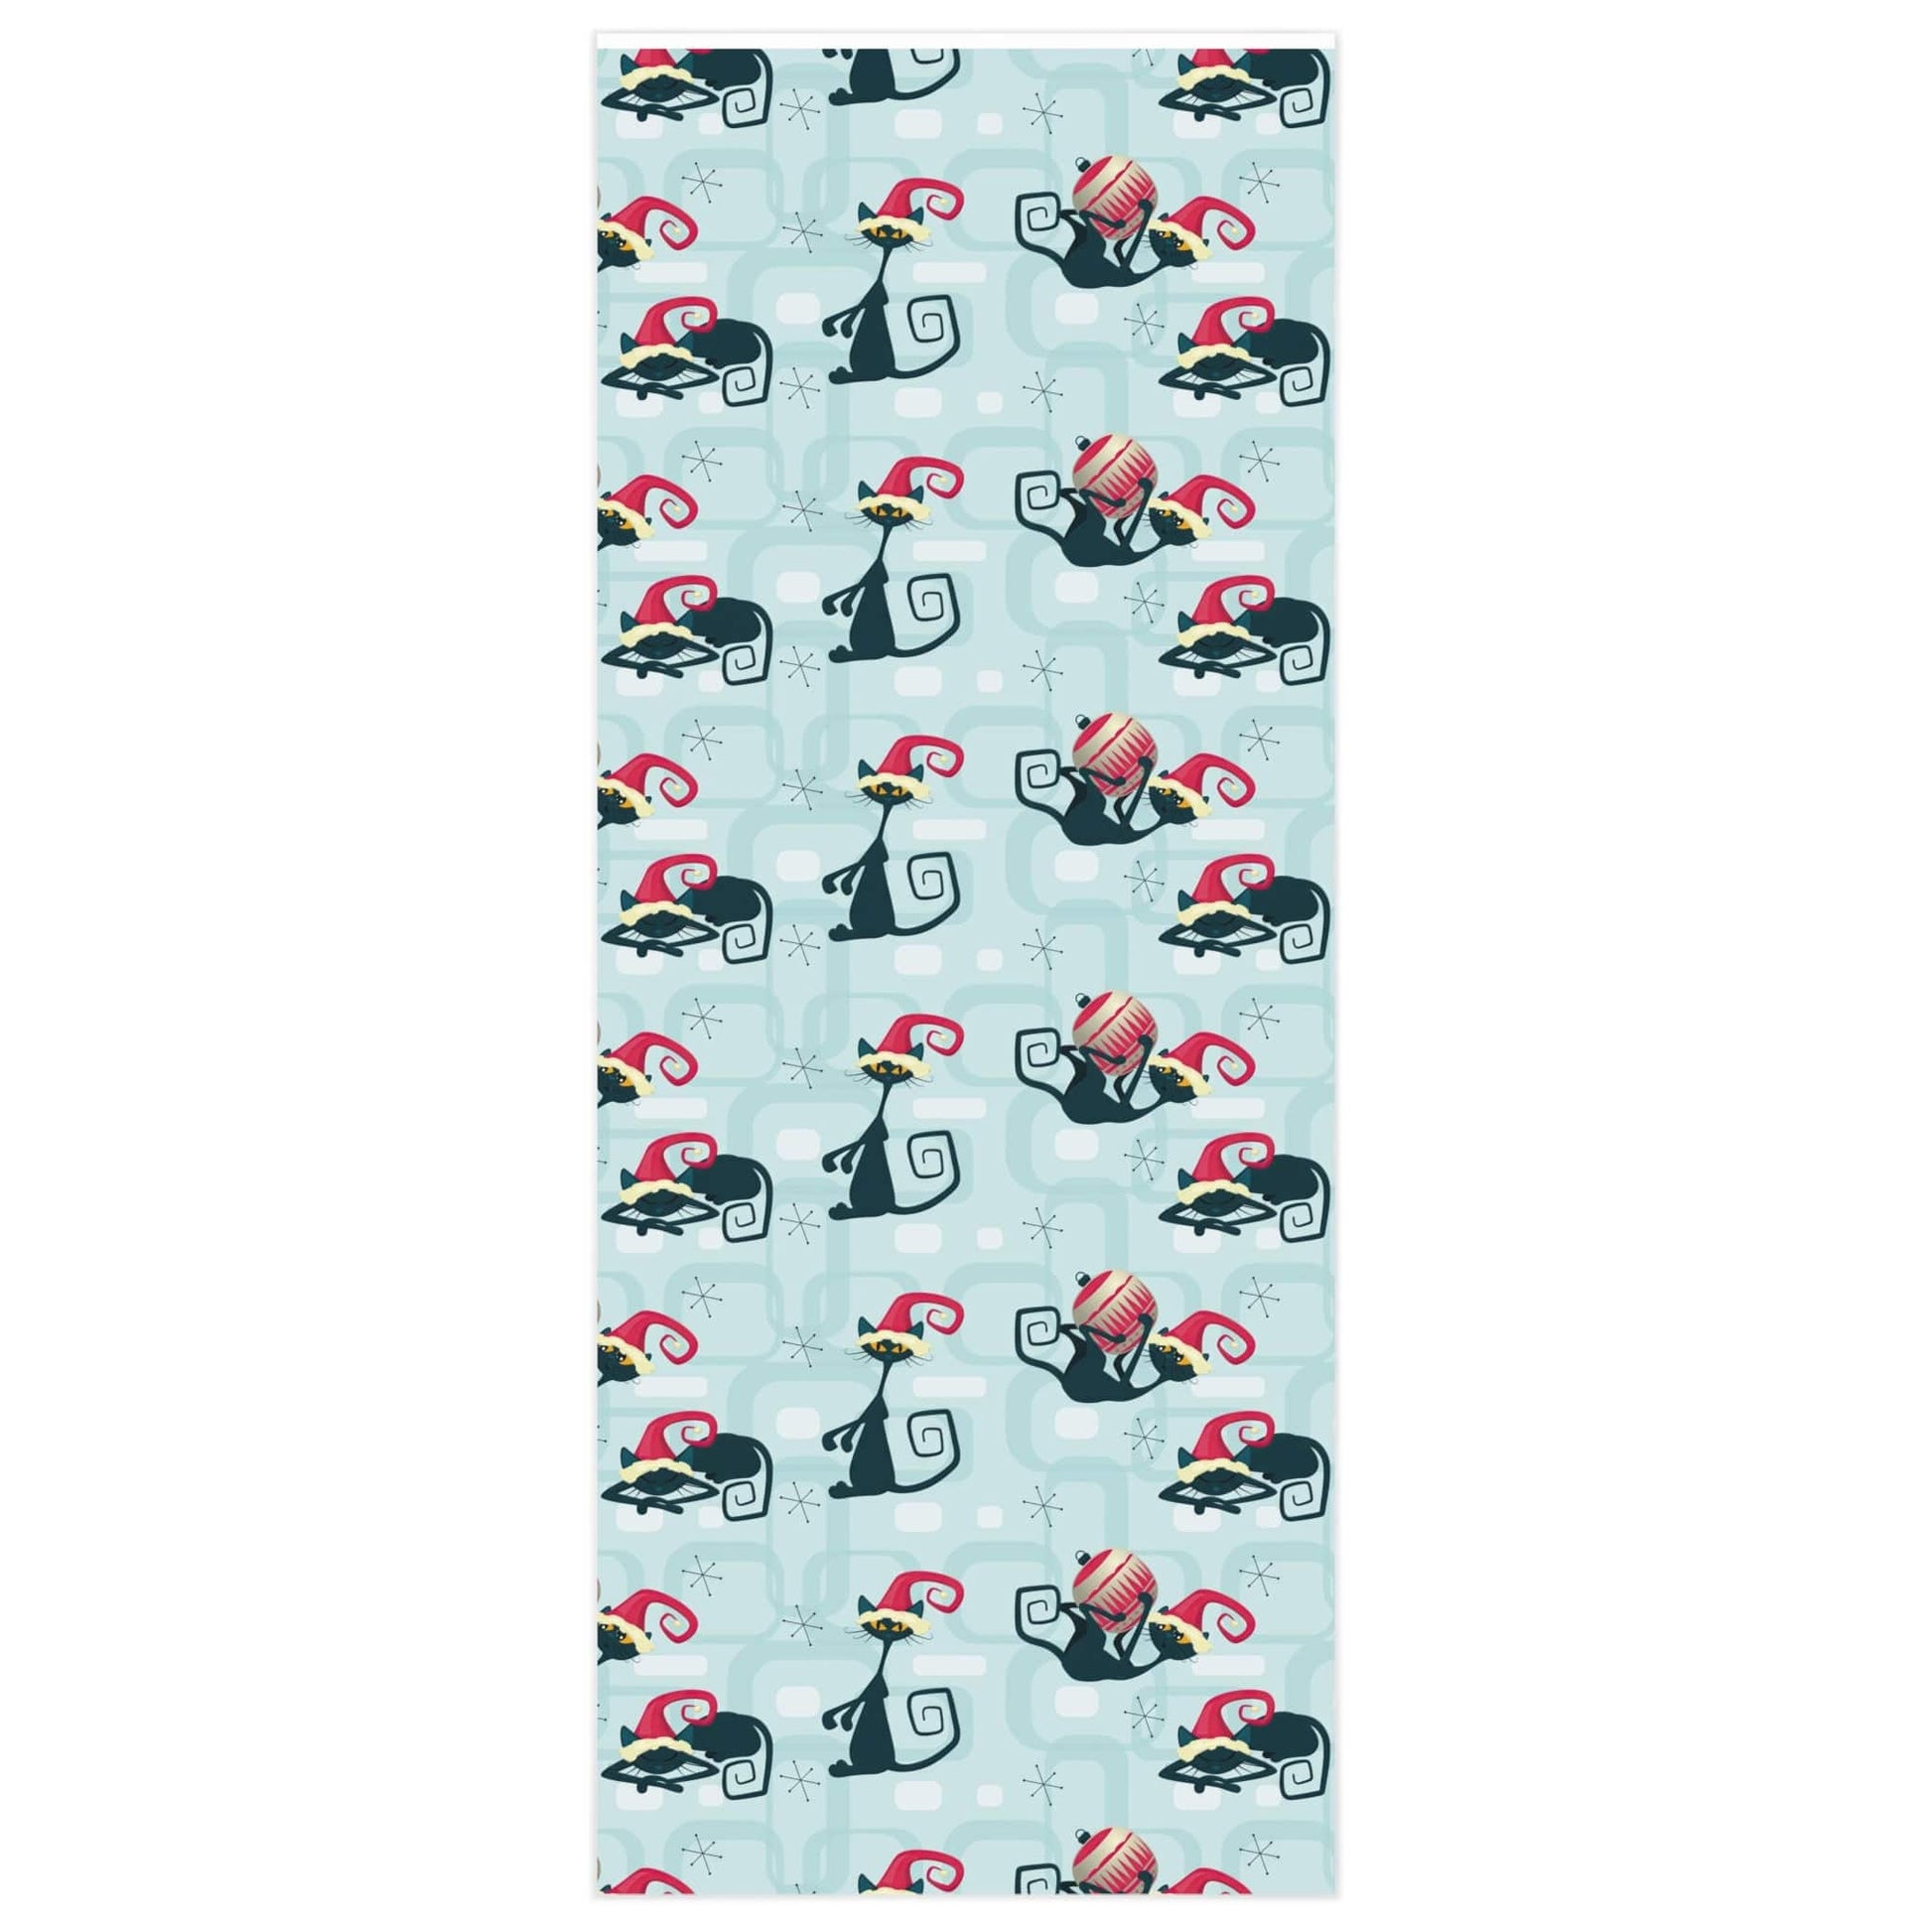 Printify Retro Atomic Cat Christmas Wrapping Paper, Mid Century Modern Blue Holiday Gift Wrap Home Decor